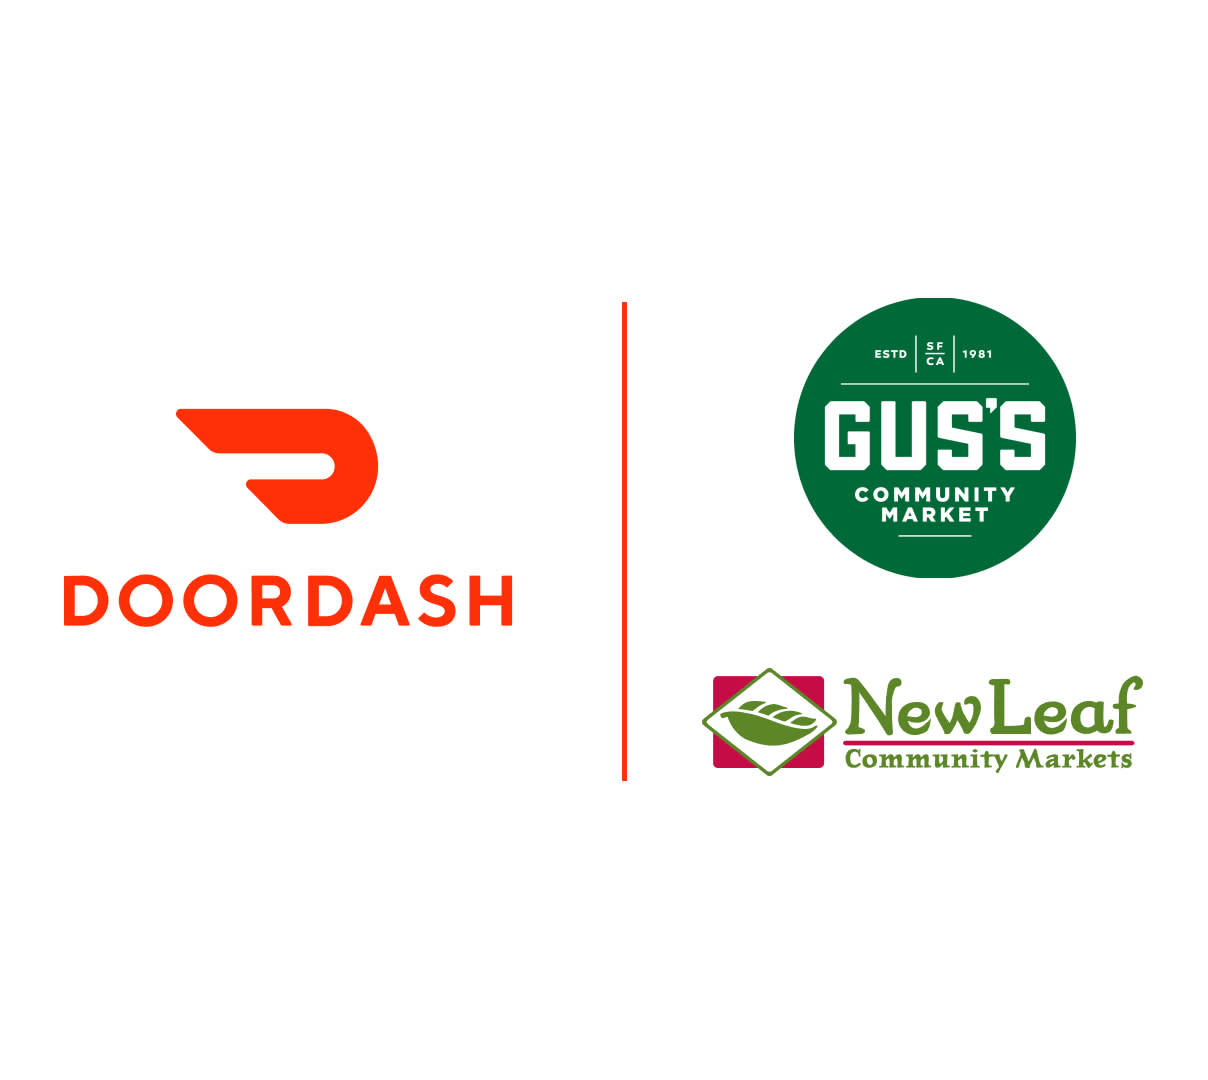 Logos from DoorDash, Gus's Community Market and New Leaf Community Markets.